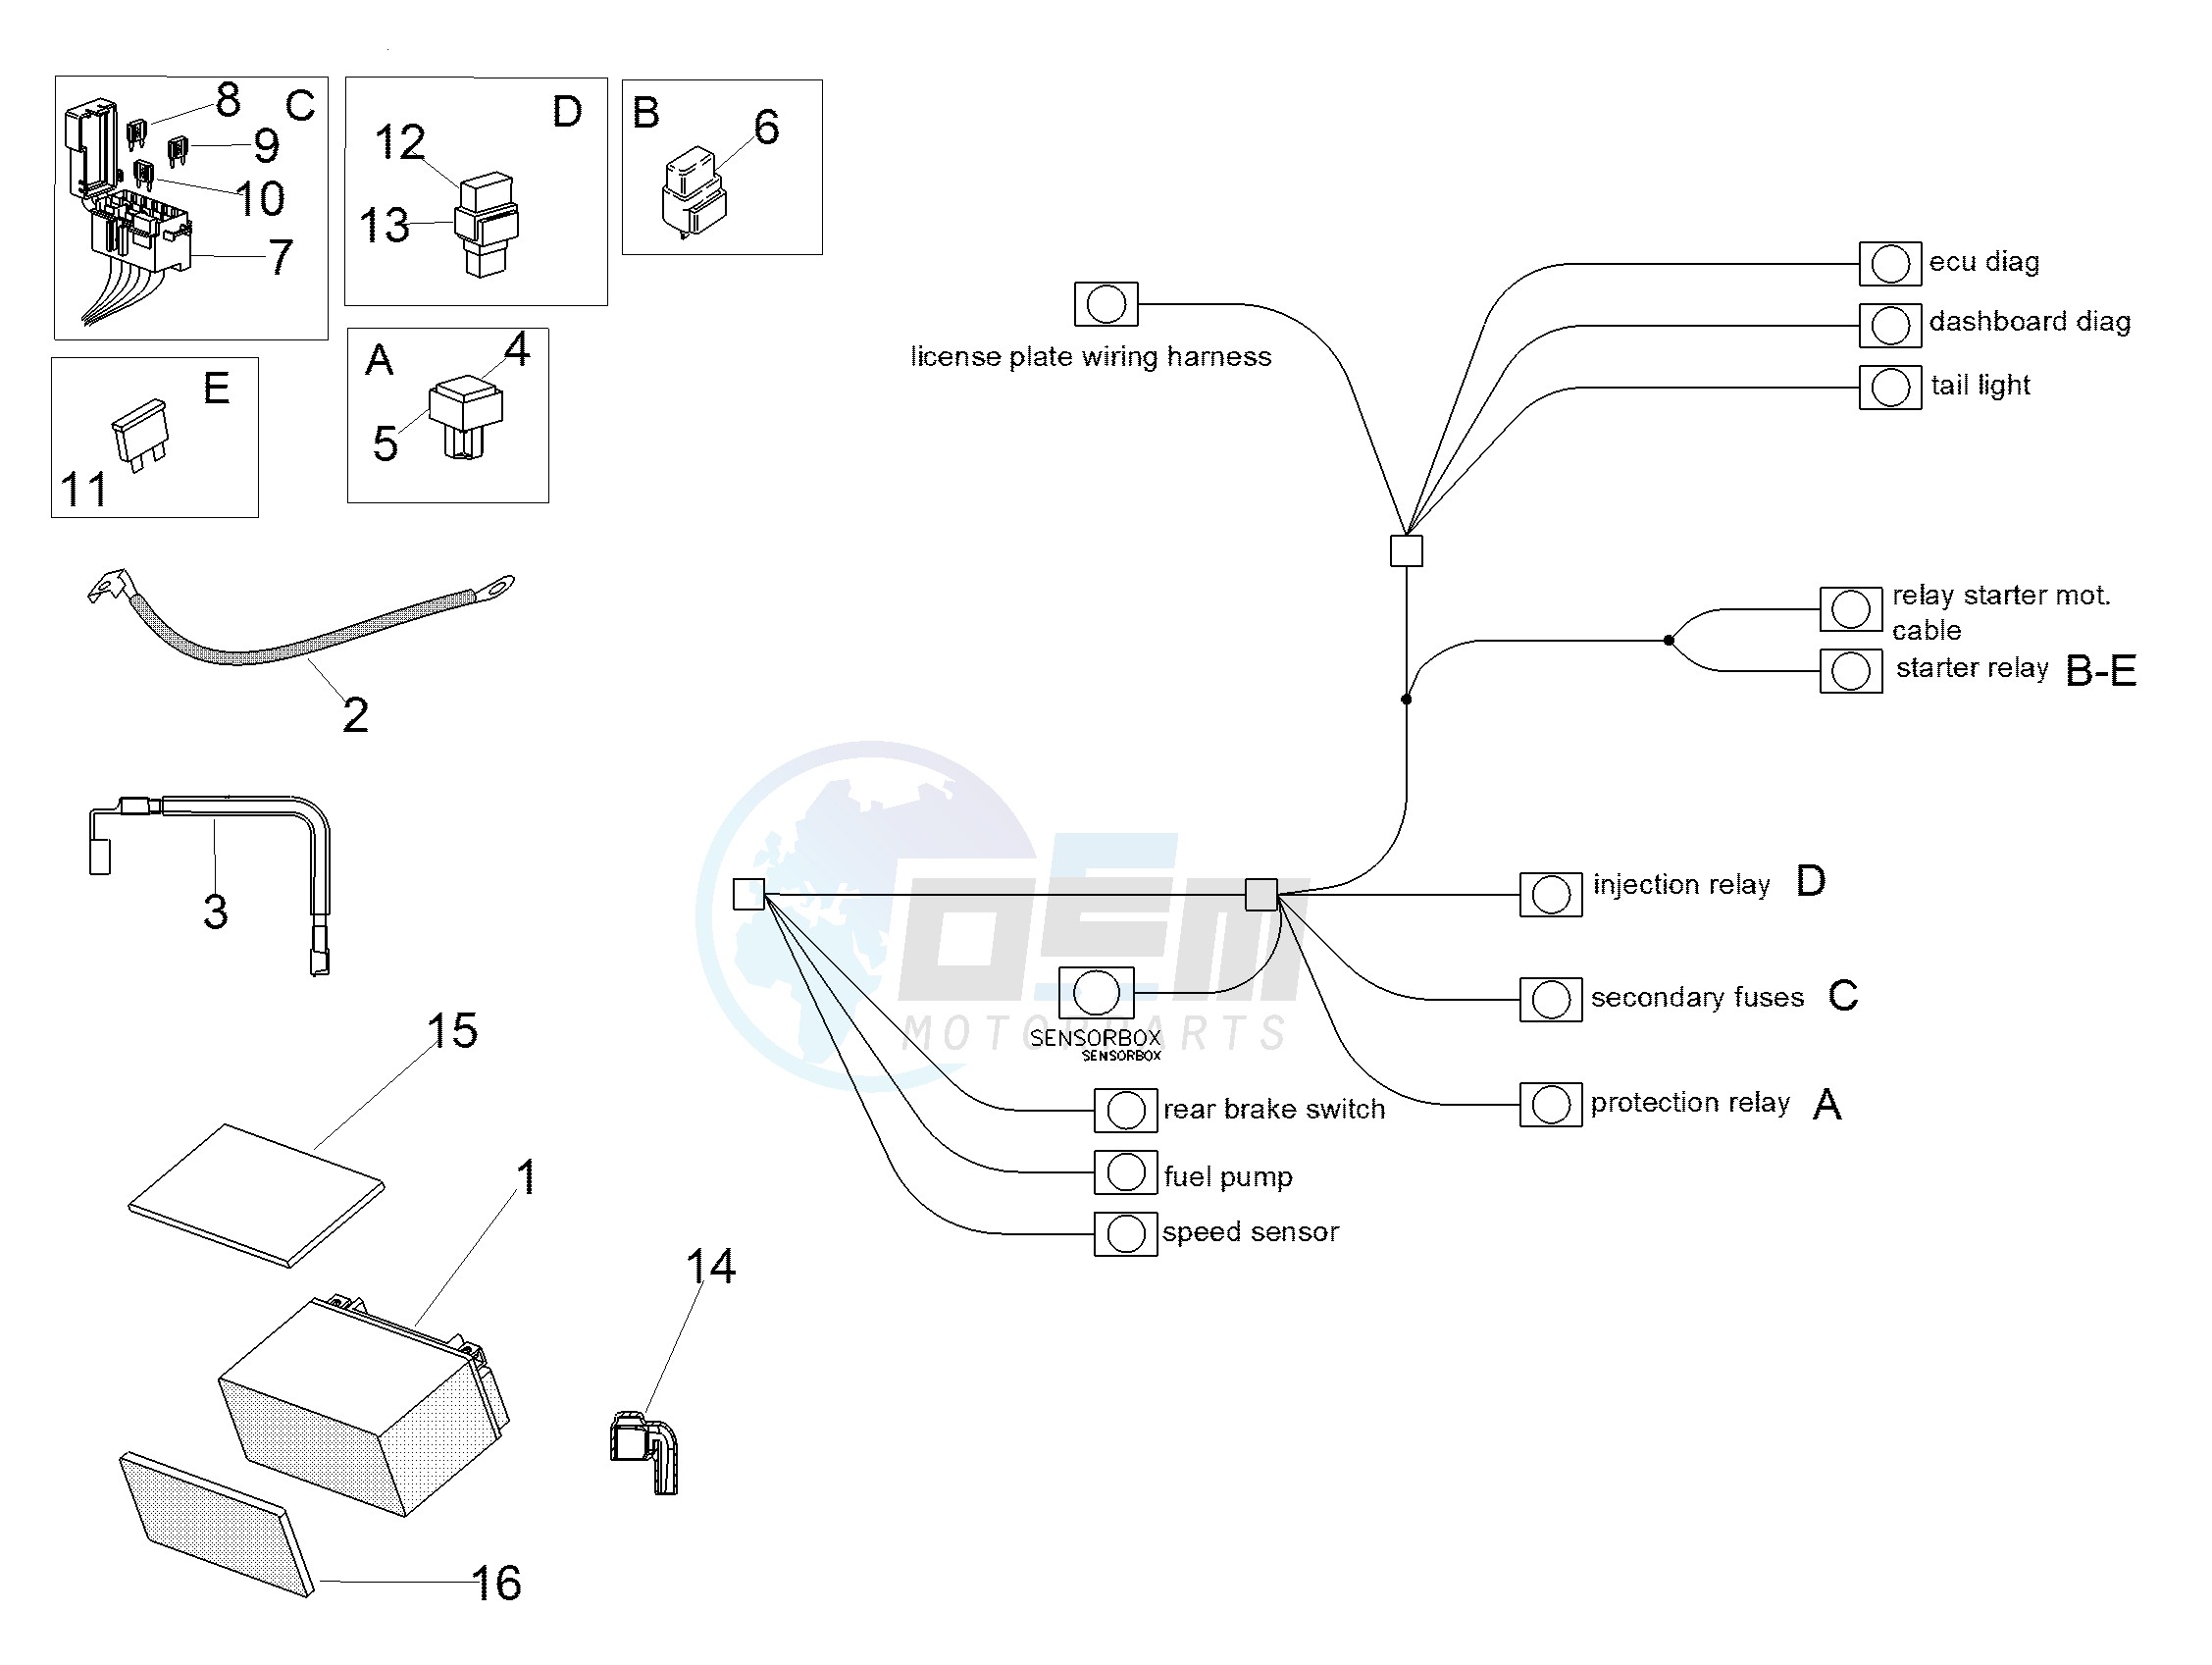 Electrical system II blueprint